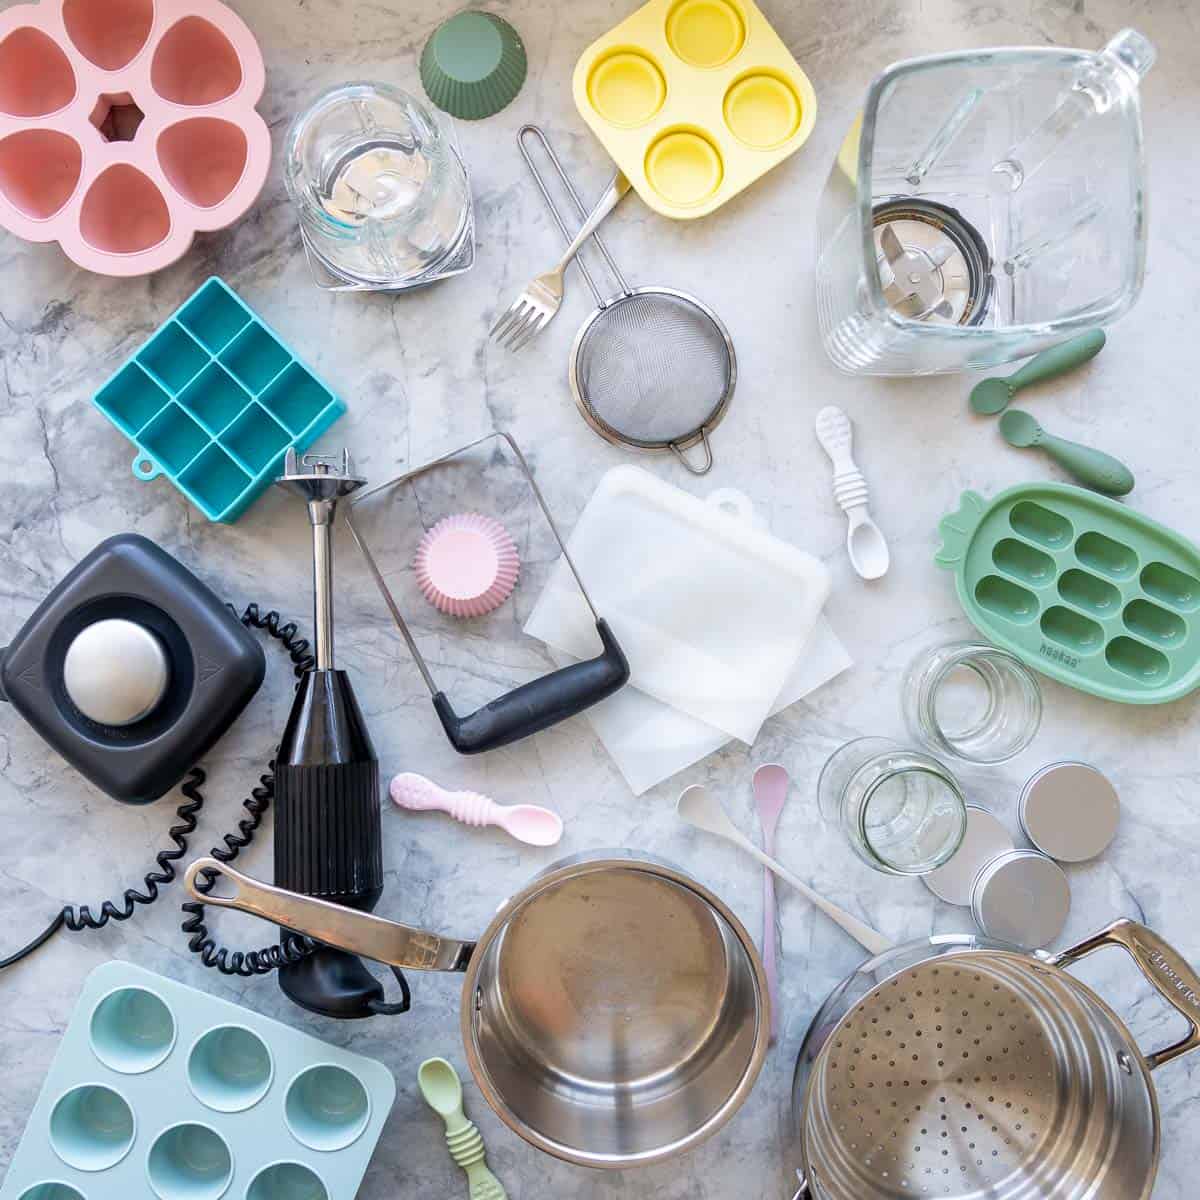 All the cooking utensils associated with making homemade baby food laid out on a bench top, pots, steamers, blender, sieve, ice cube trays, zip lock bags.